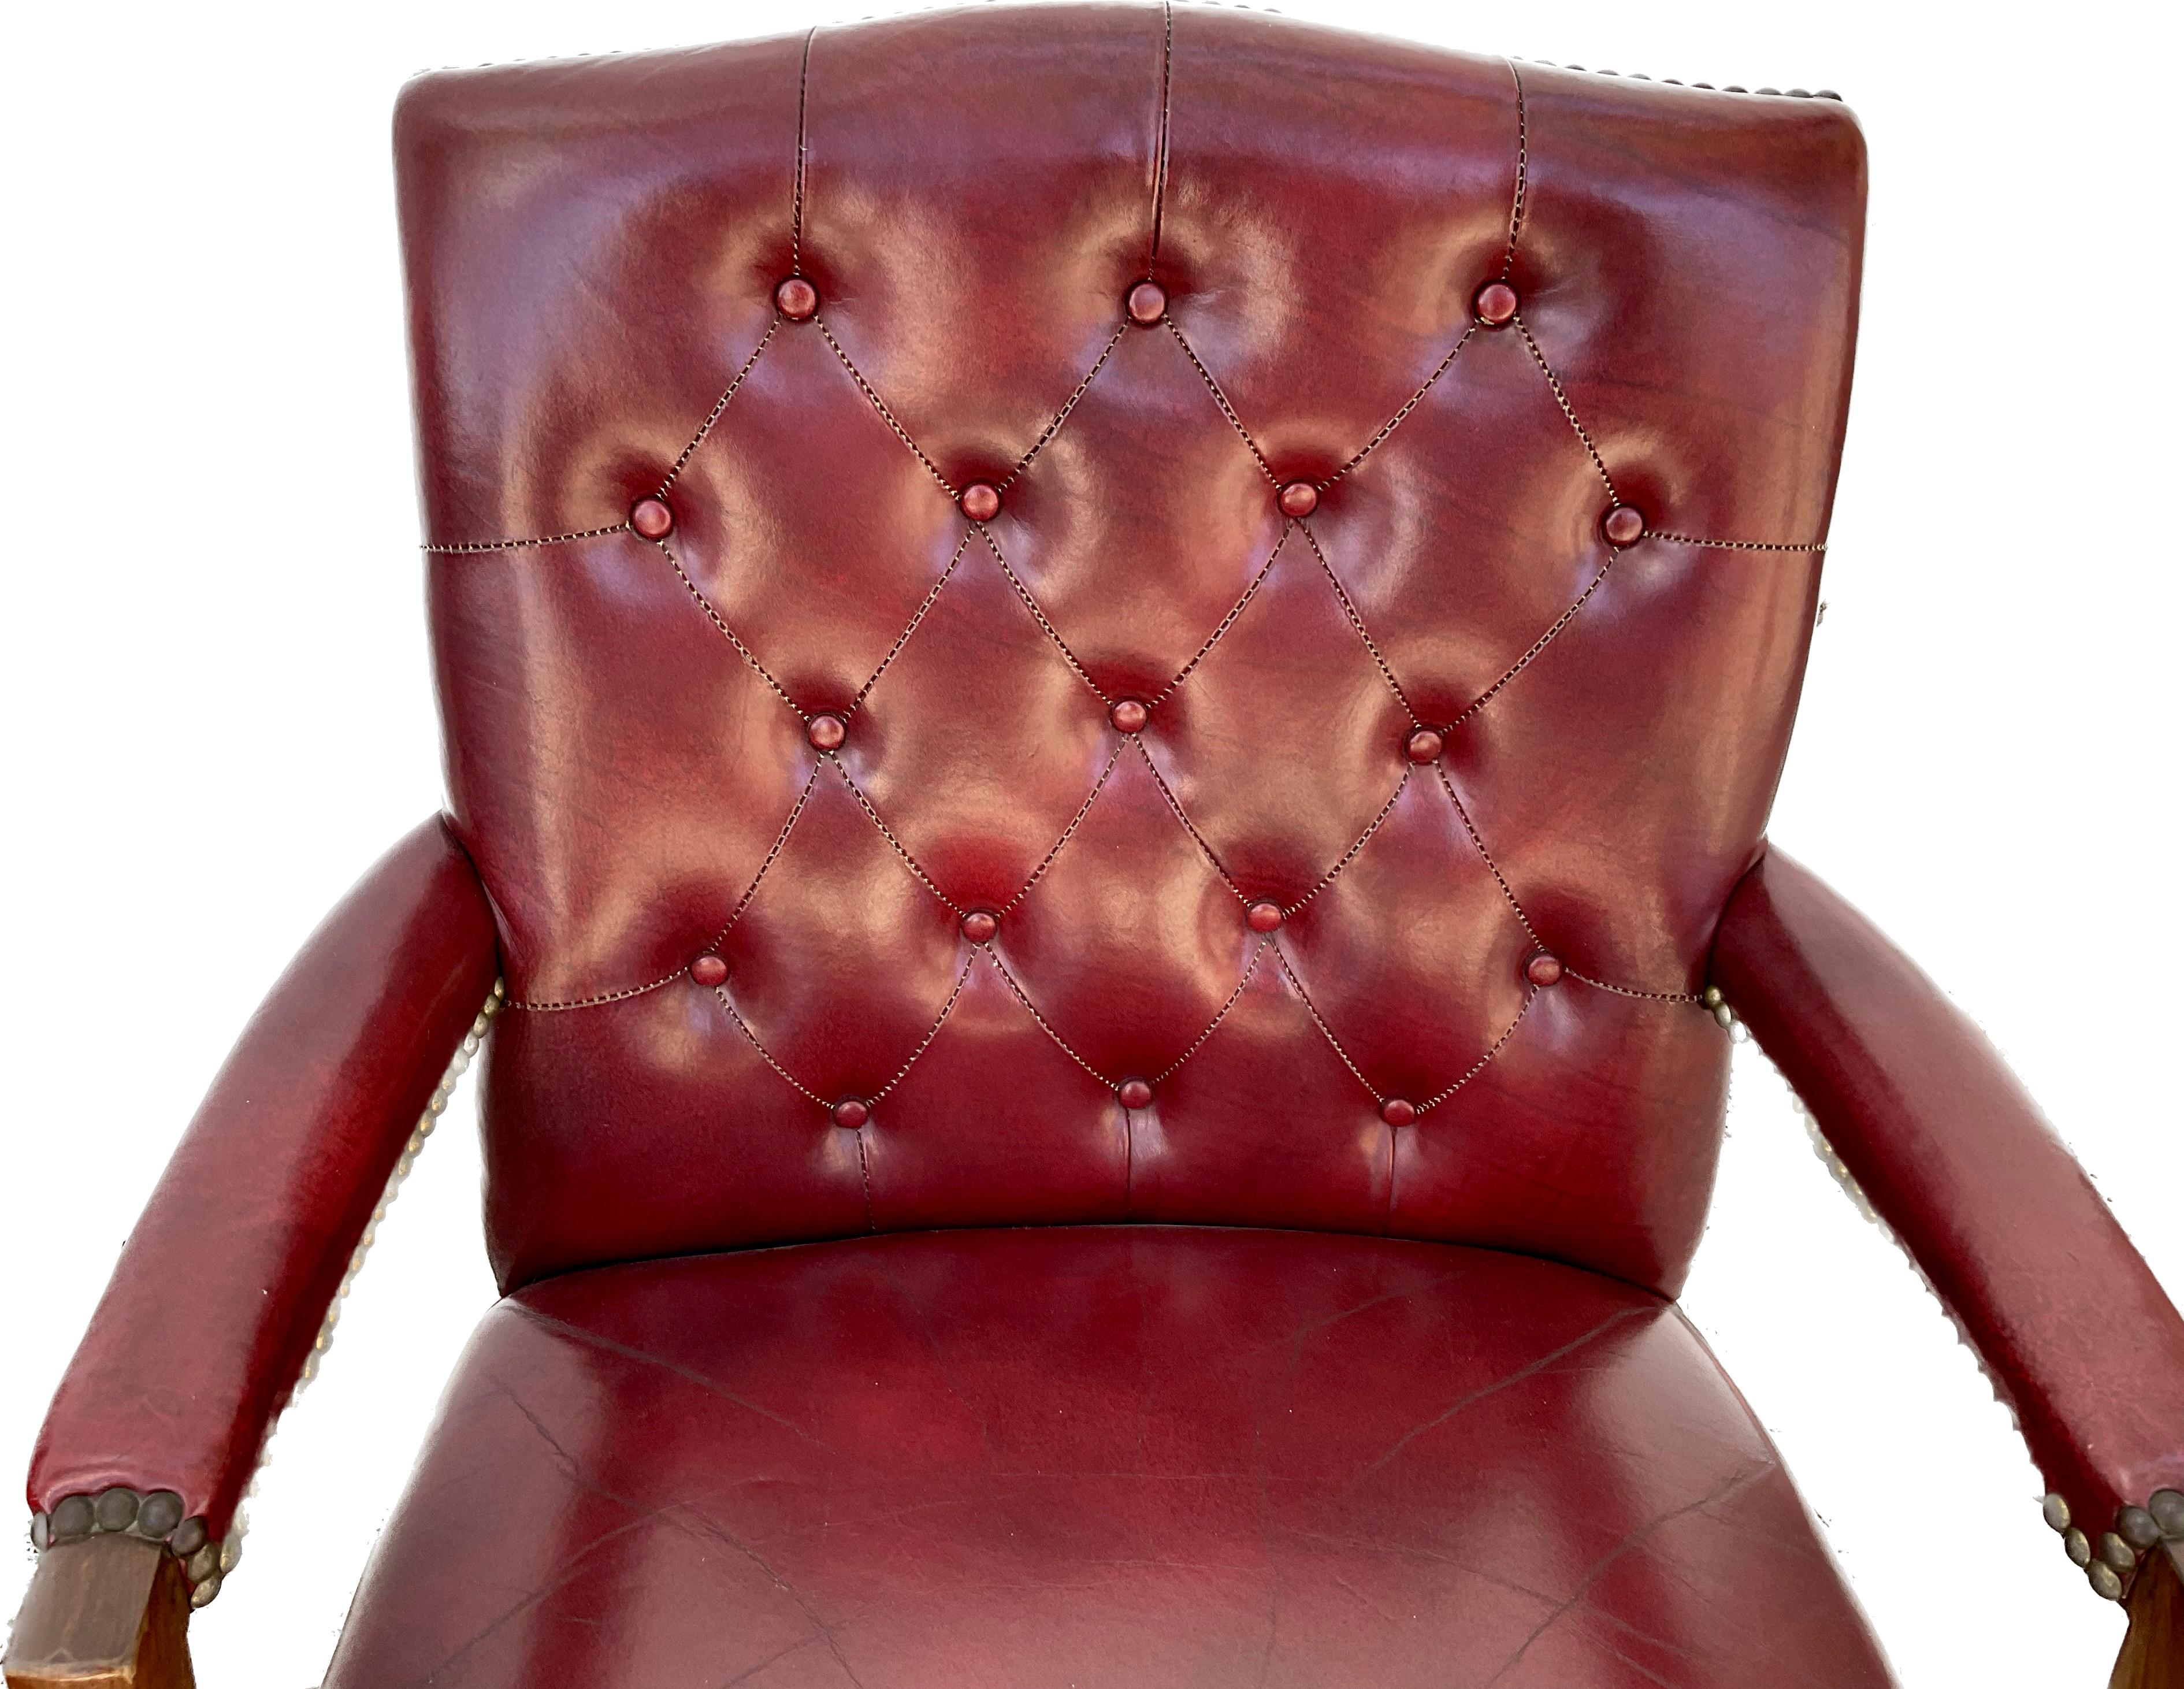 Pair of Tufted Leather Chesterfield Armchairs In Good Condition For Sale In Bradenton, FL